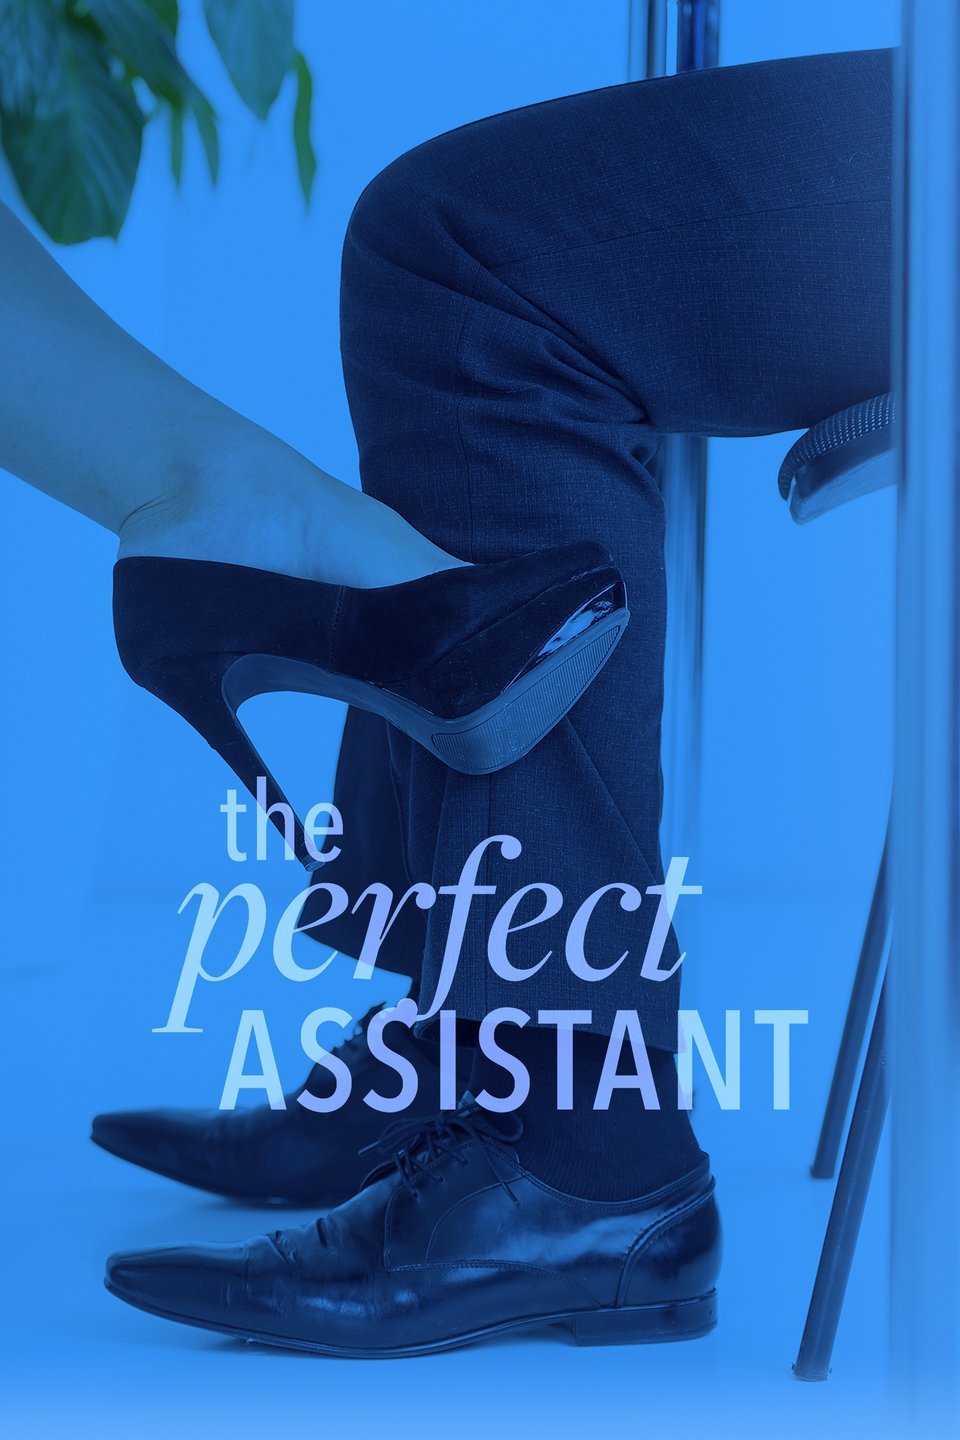 monica reynolds the perfect assistant checklist